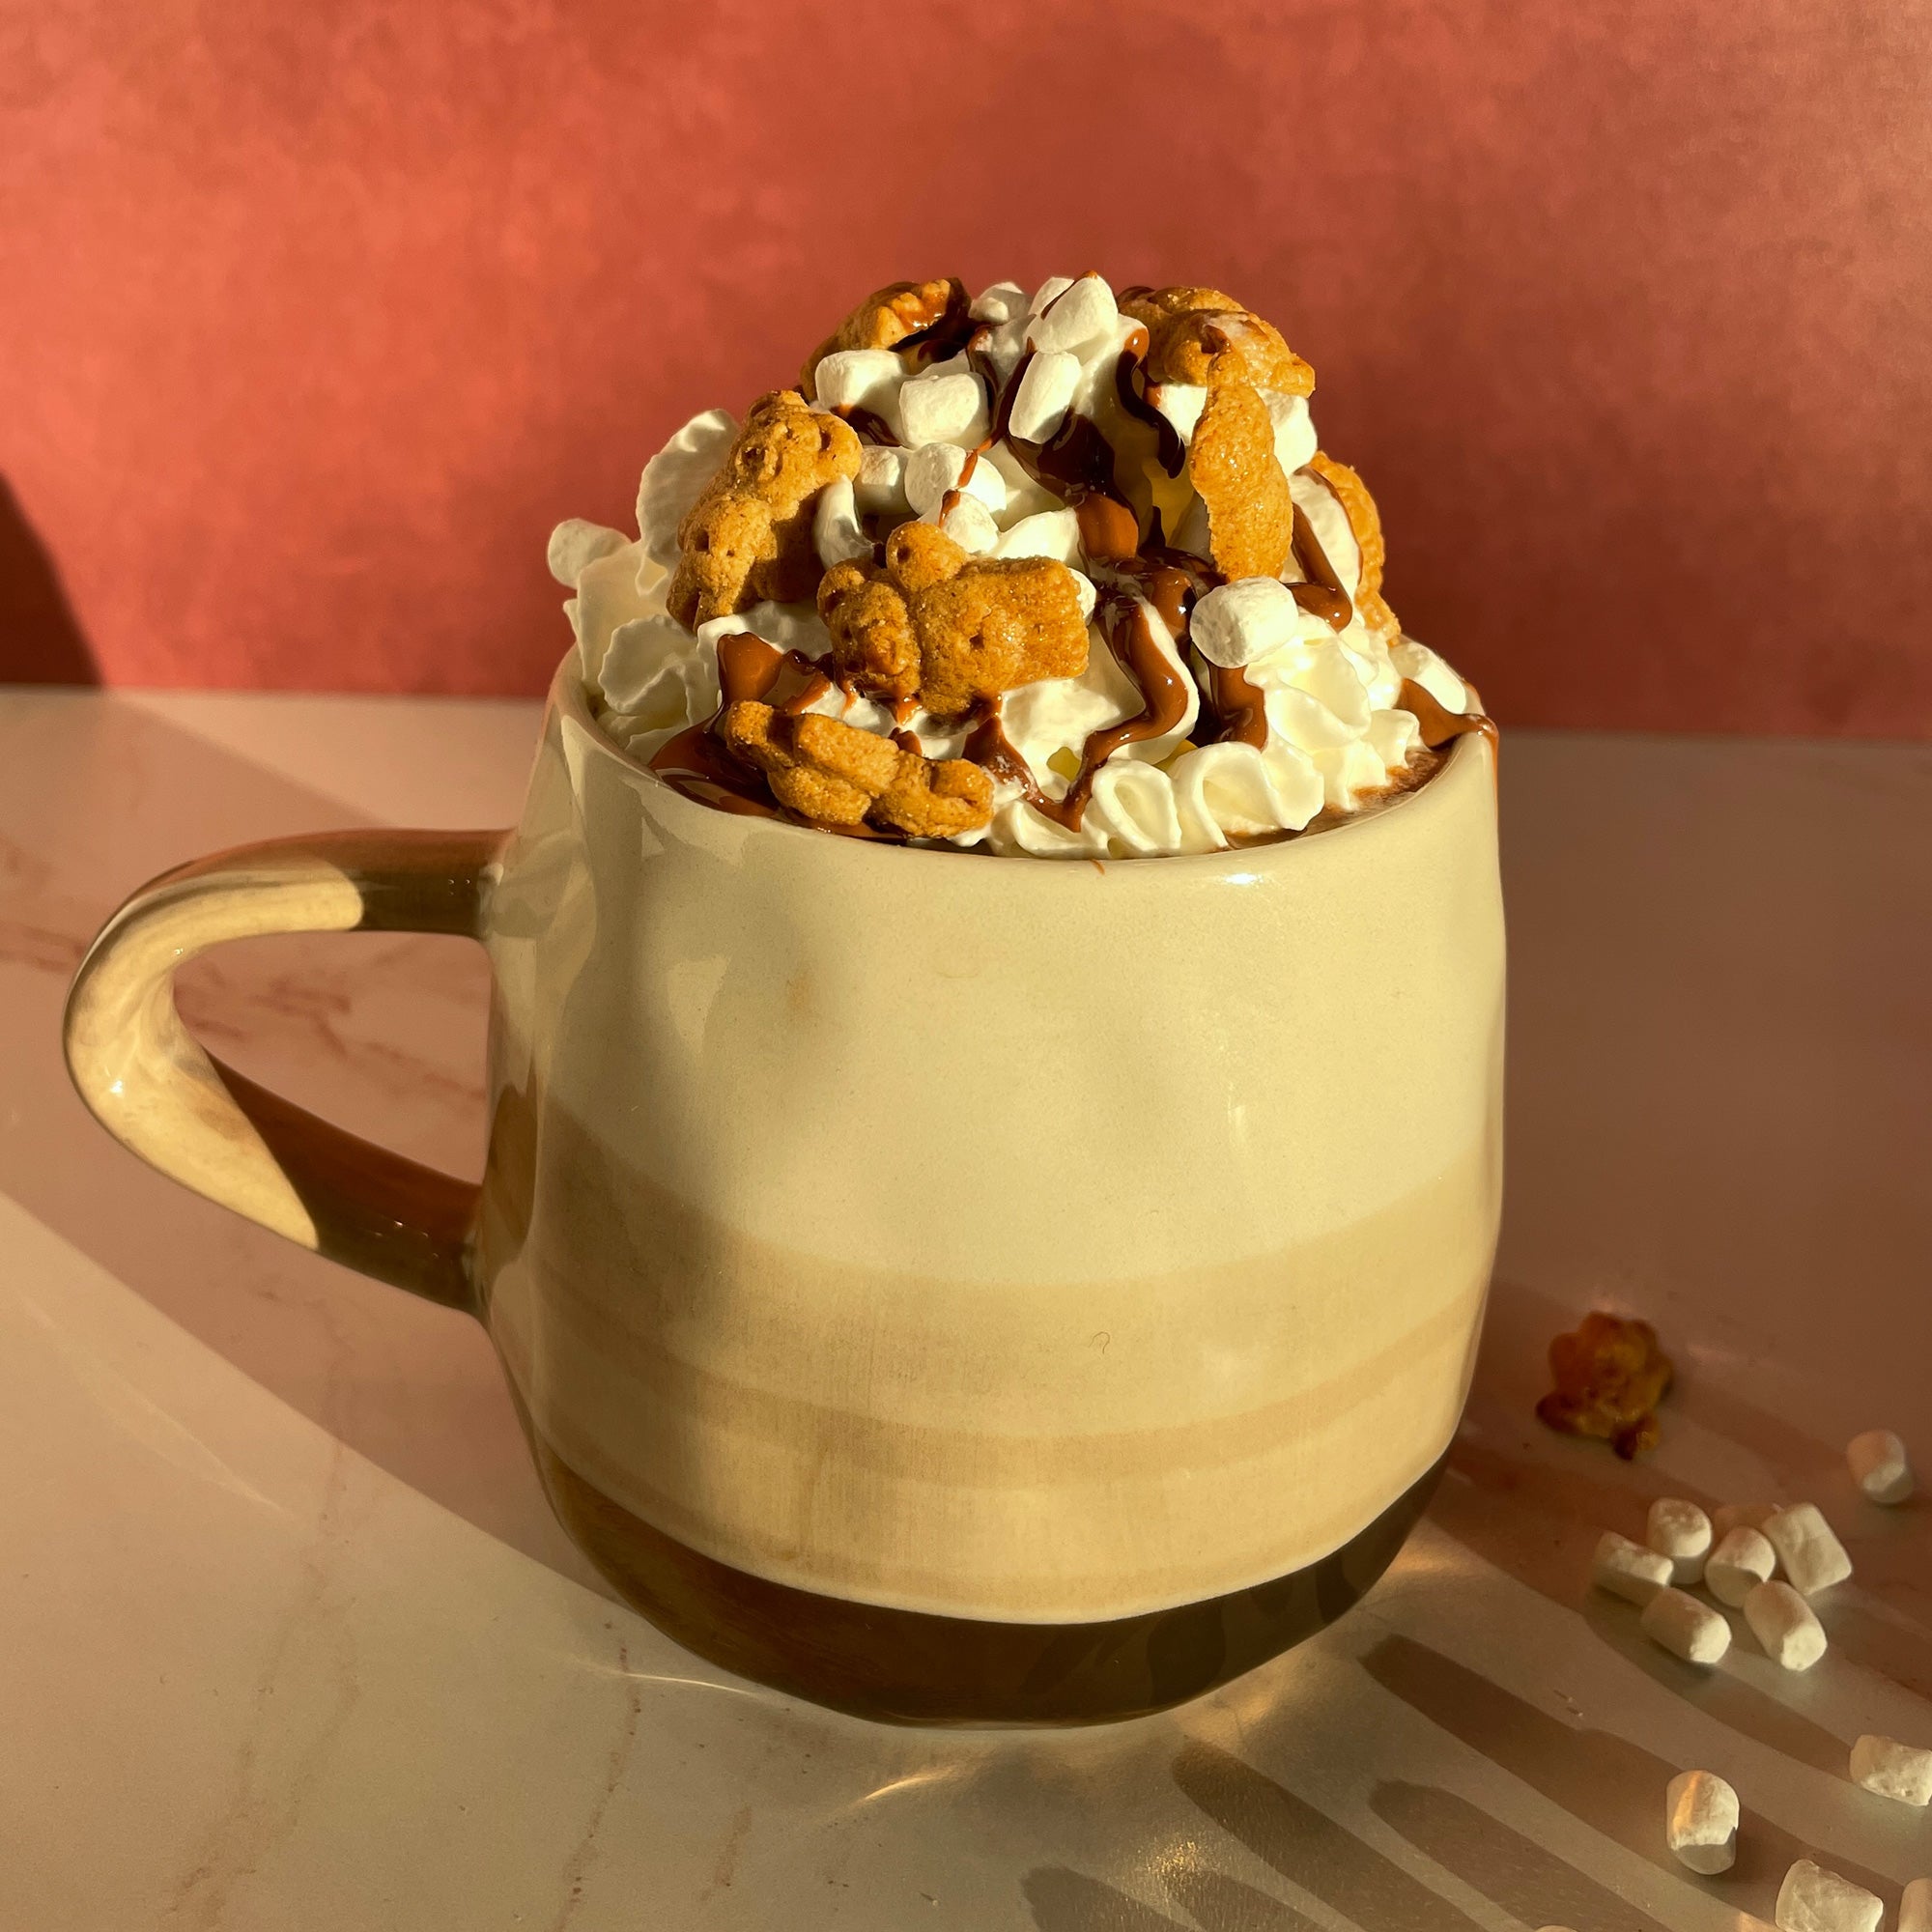 S'mores Loaded Hot Chocolate